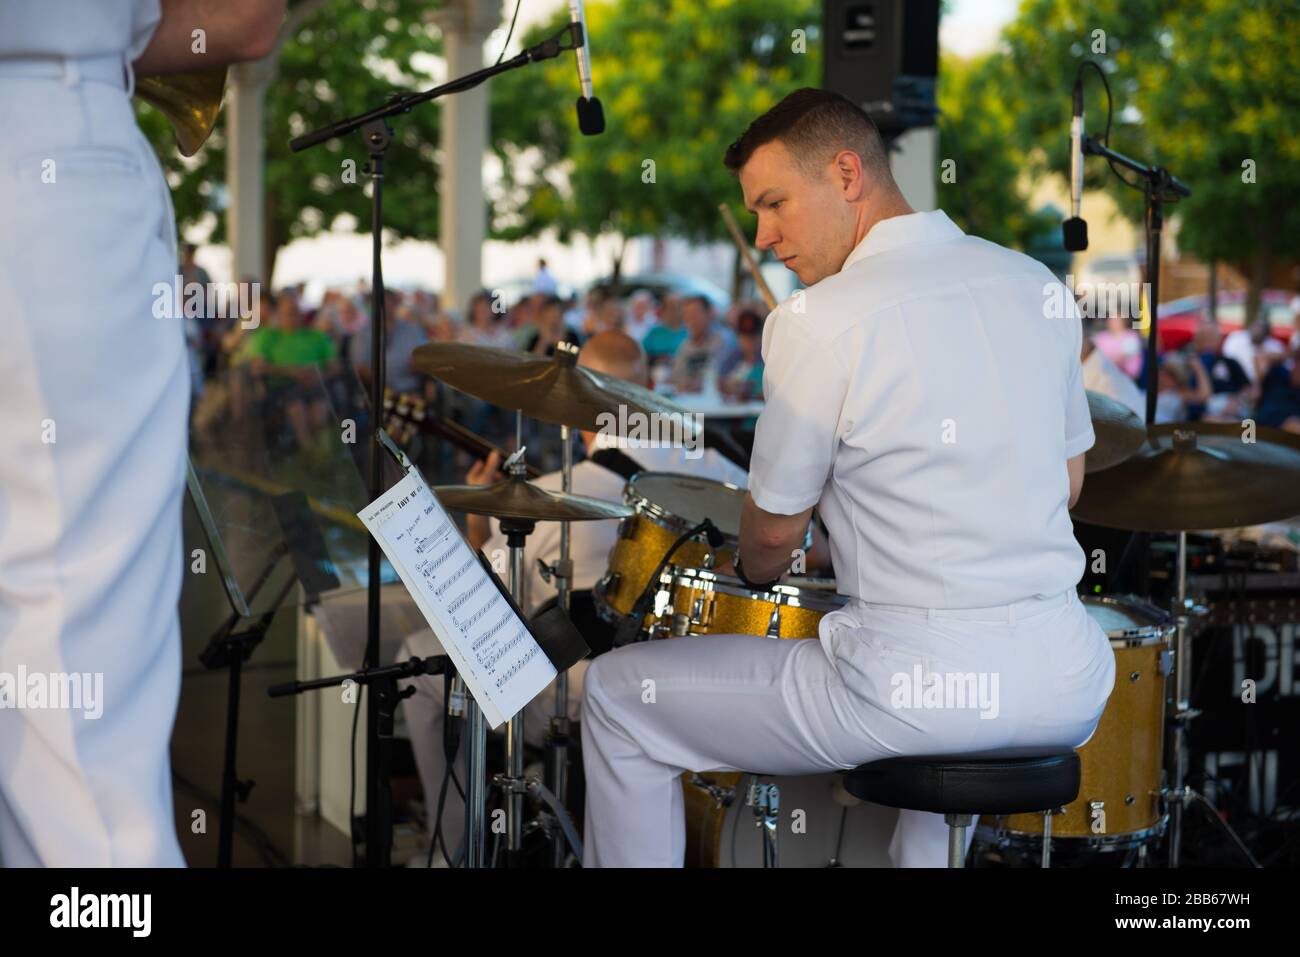 '170615-N-VV903-057 - Manassas, VA (June 15, 2017) Musician !st Class Kevin McDonald of United States Navy Band Commodores lays down the groove before an enthusiastic Summer audience at the Harris Pavillion in Manassas Virginia.  The United States Navy Band provides both military exposure and cultural enrichment to music lovers of all ages through its public concert series.  (U. S. Navy photo by Musician 1st Class David Aspinwall/Released); 15 June 2017, 19:33; 170615-N-VV903-057; United States Navy Band from Washington, D.C., USA; ' Stock Photo